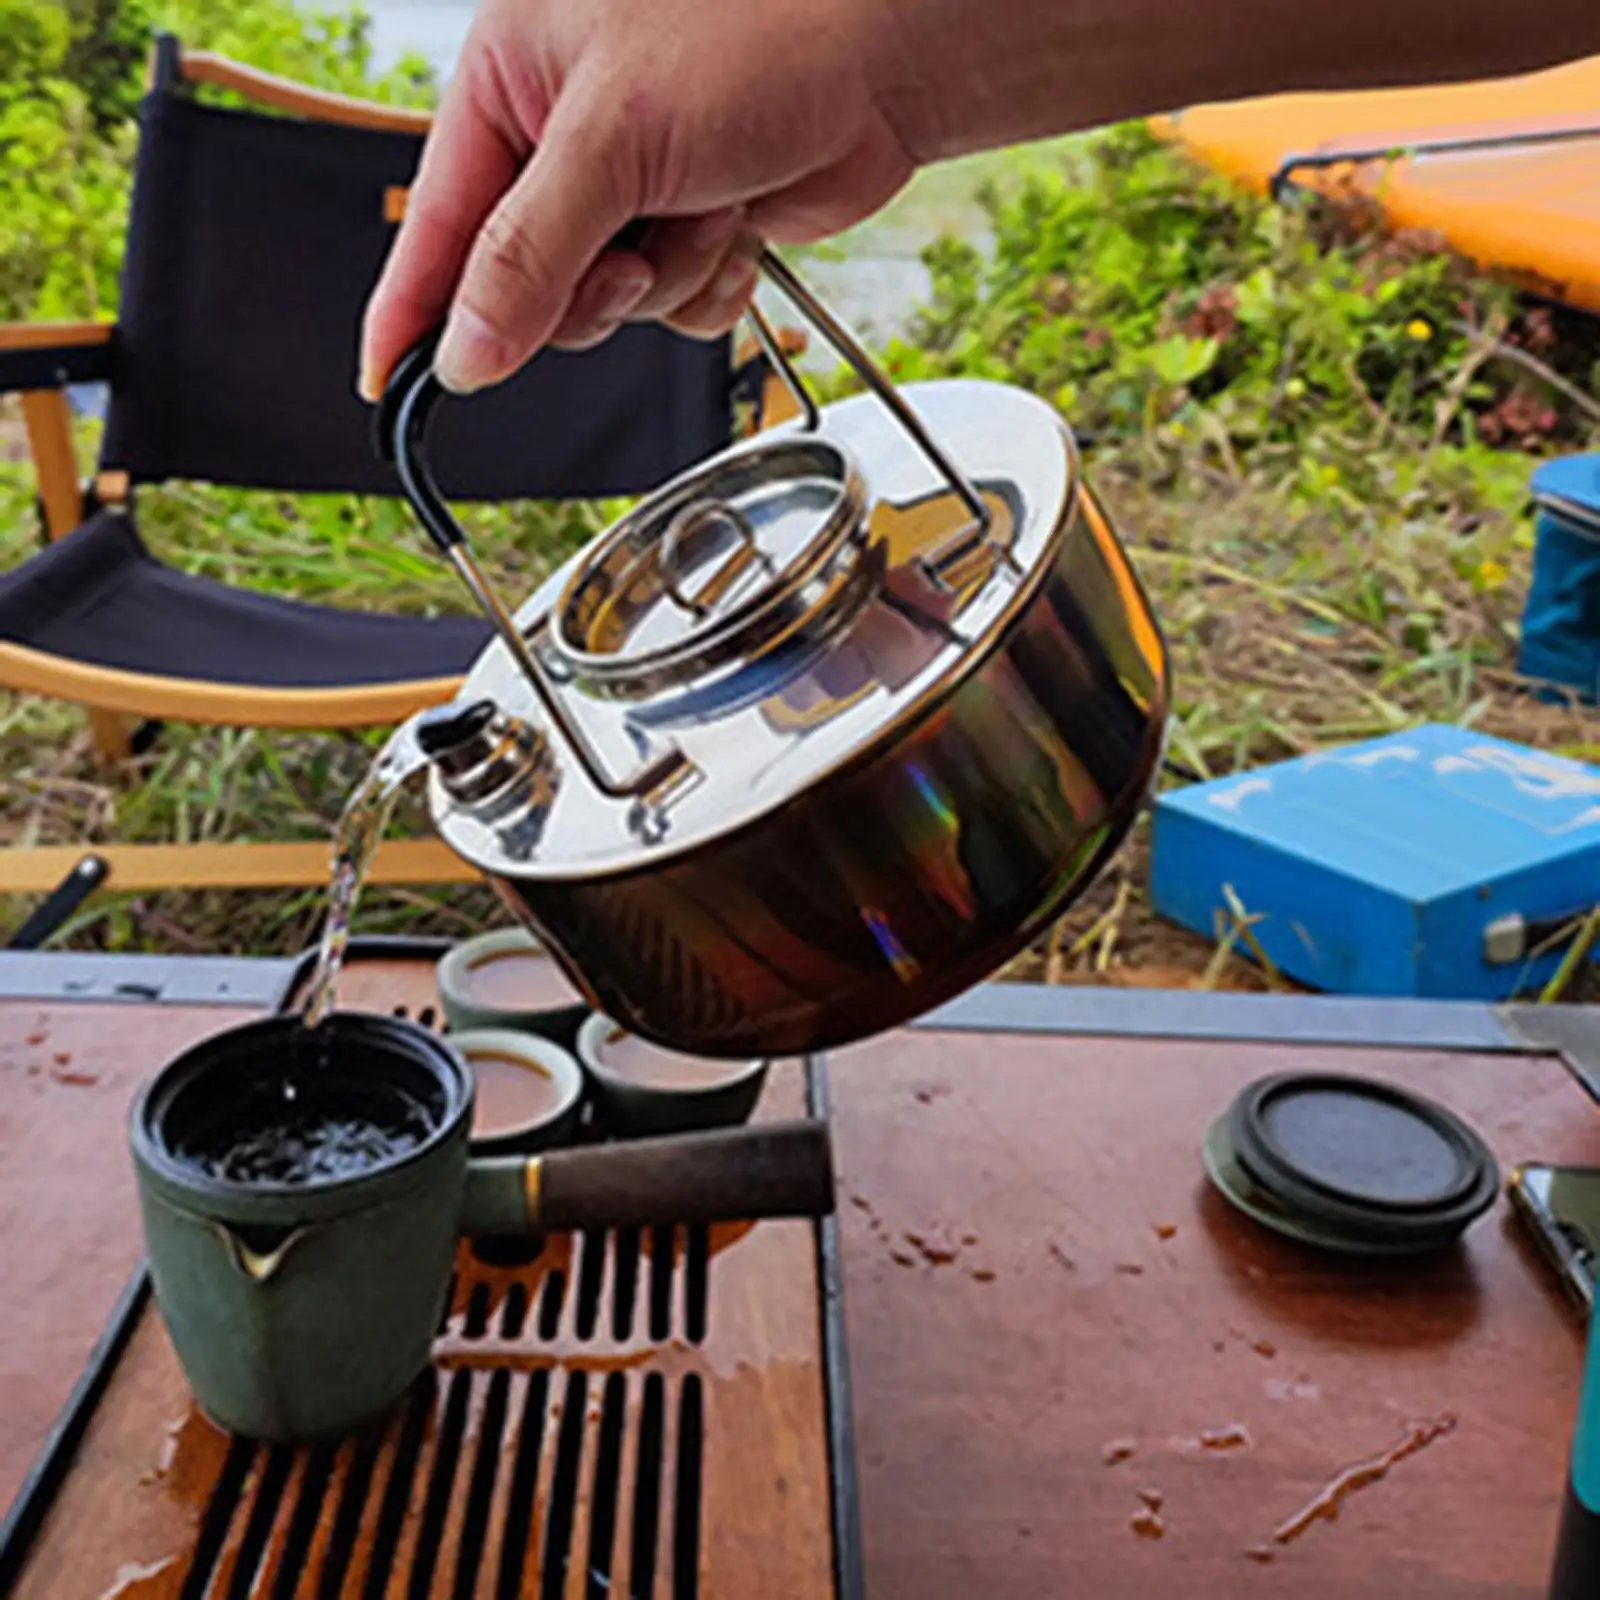 Portable Camping Tea Kettle Tea Pot Water Kettle Campfire Kettle Outdoor Kettle for Hiking Backpacking Outdoor Picnic Kitchen